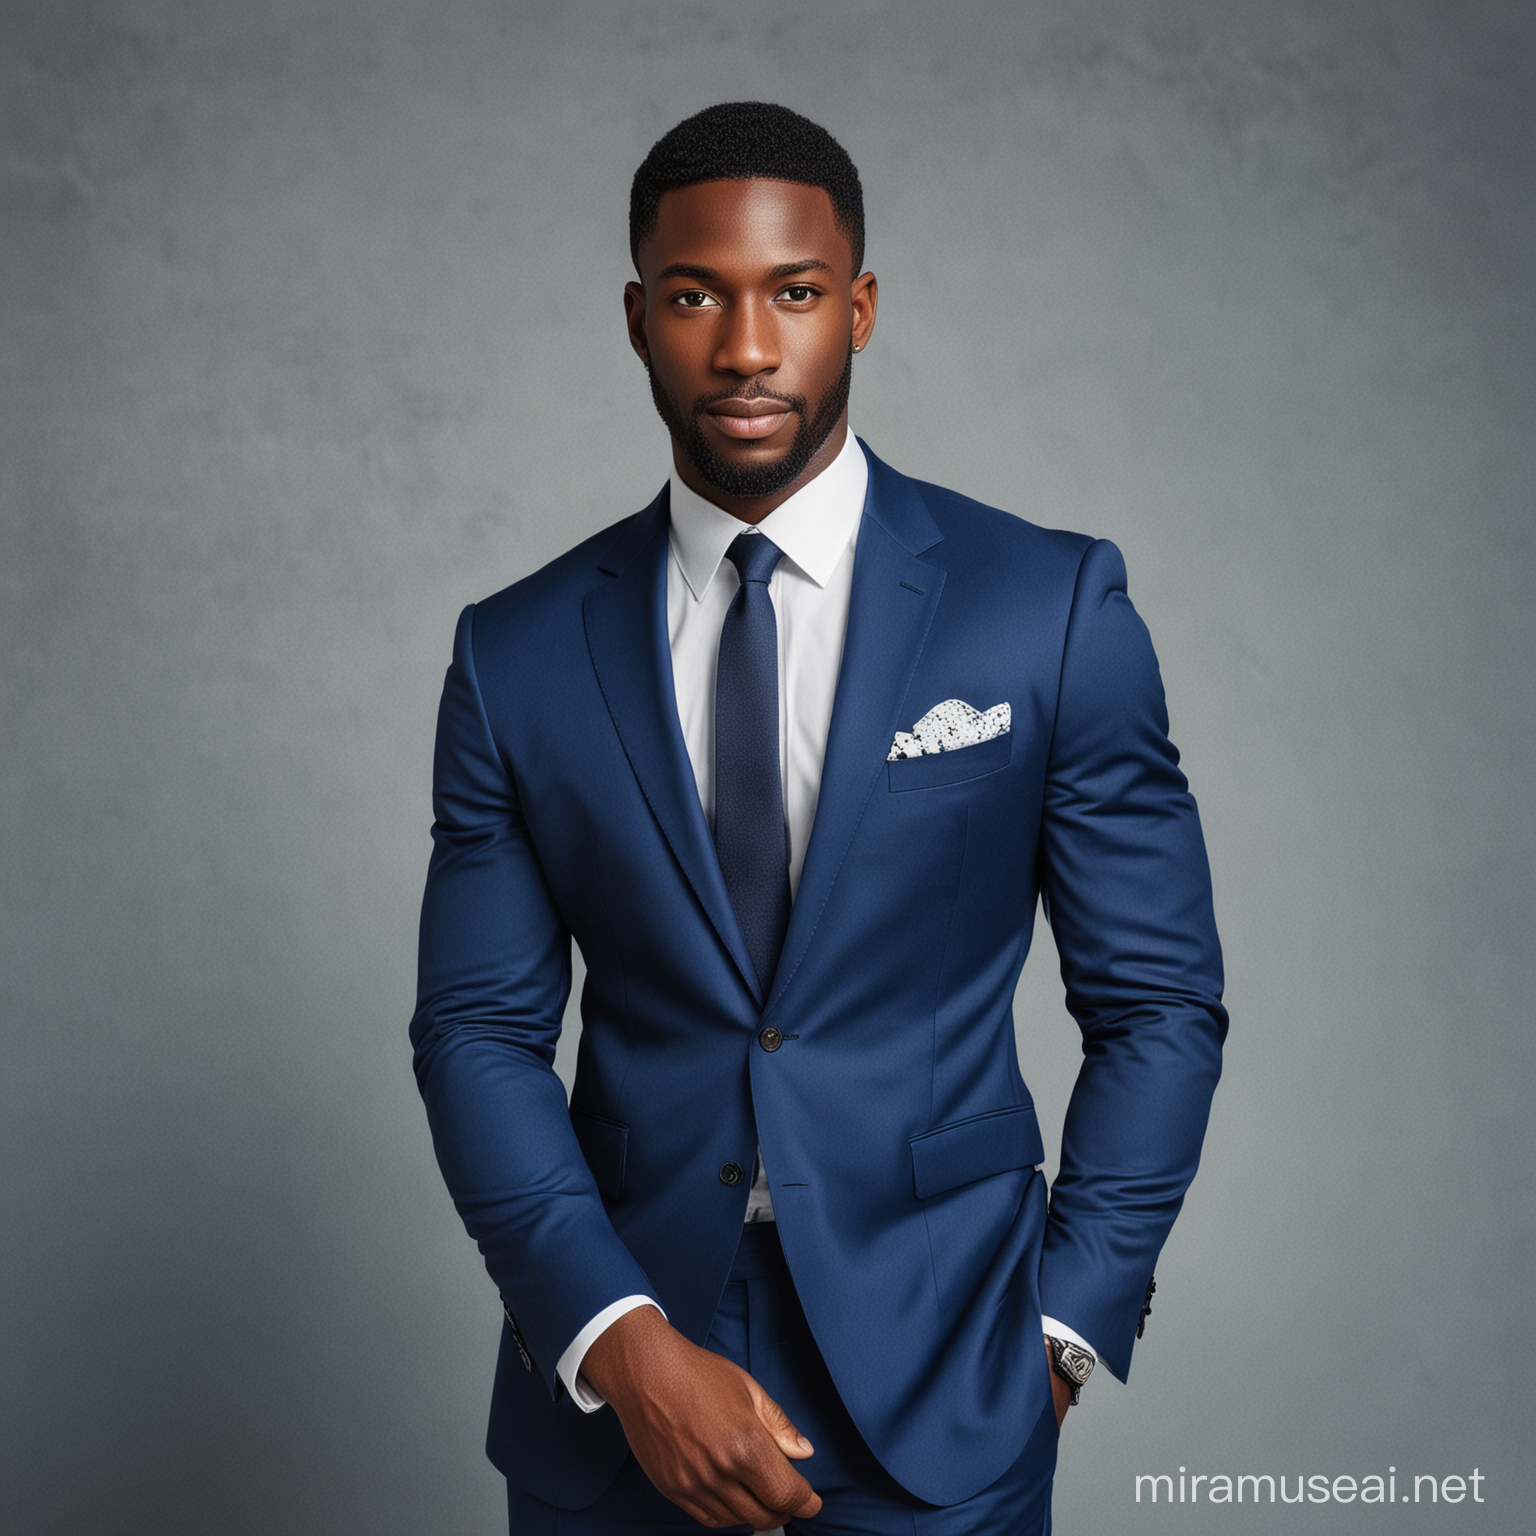 Elegant Black Man in Blue Suit Walking with Confidence